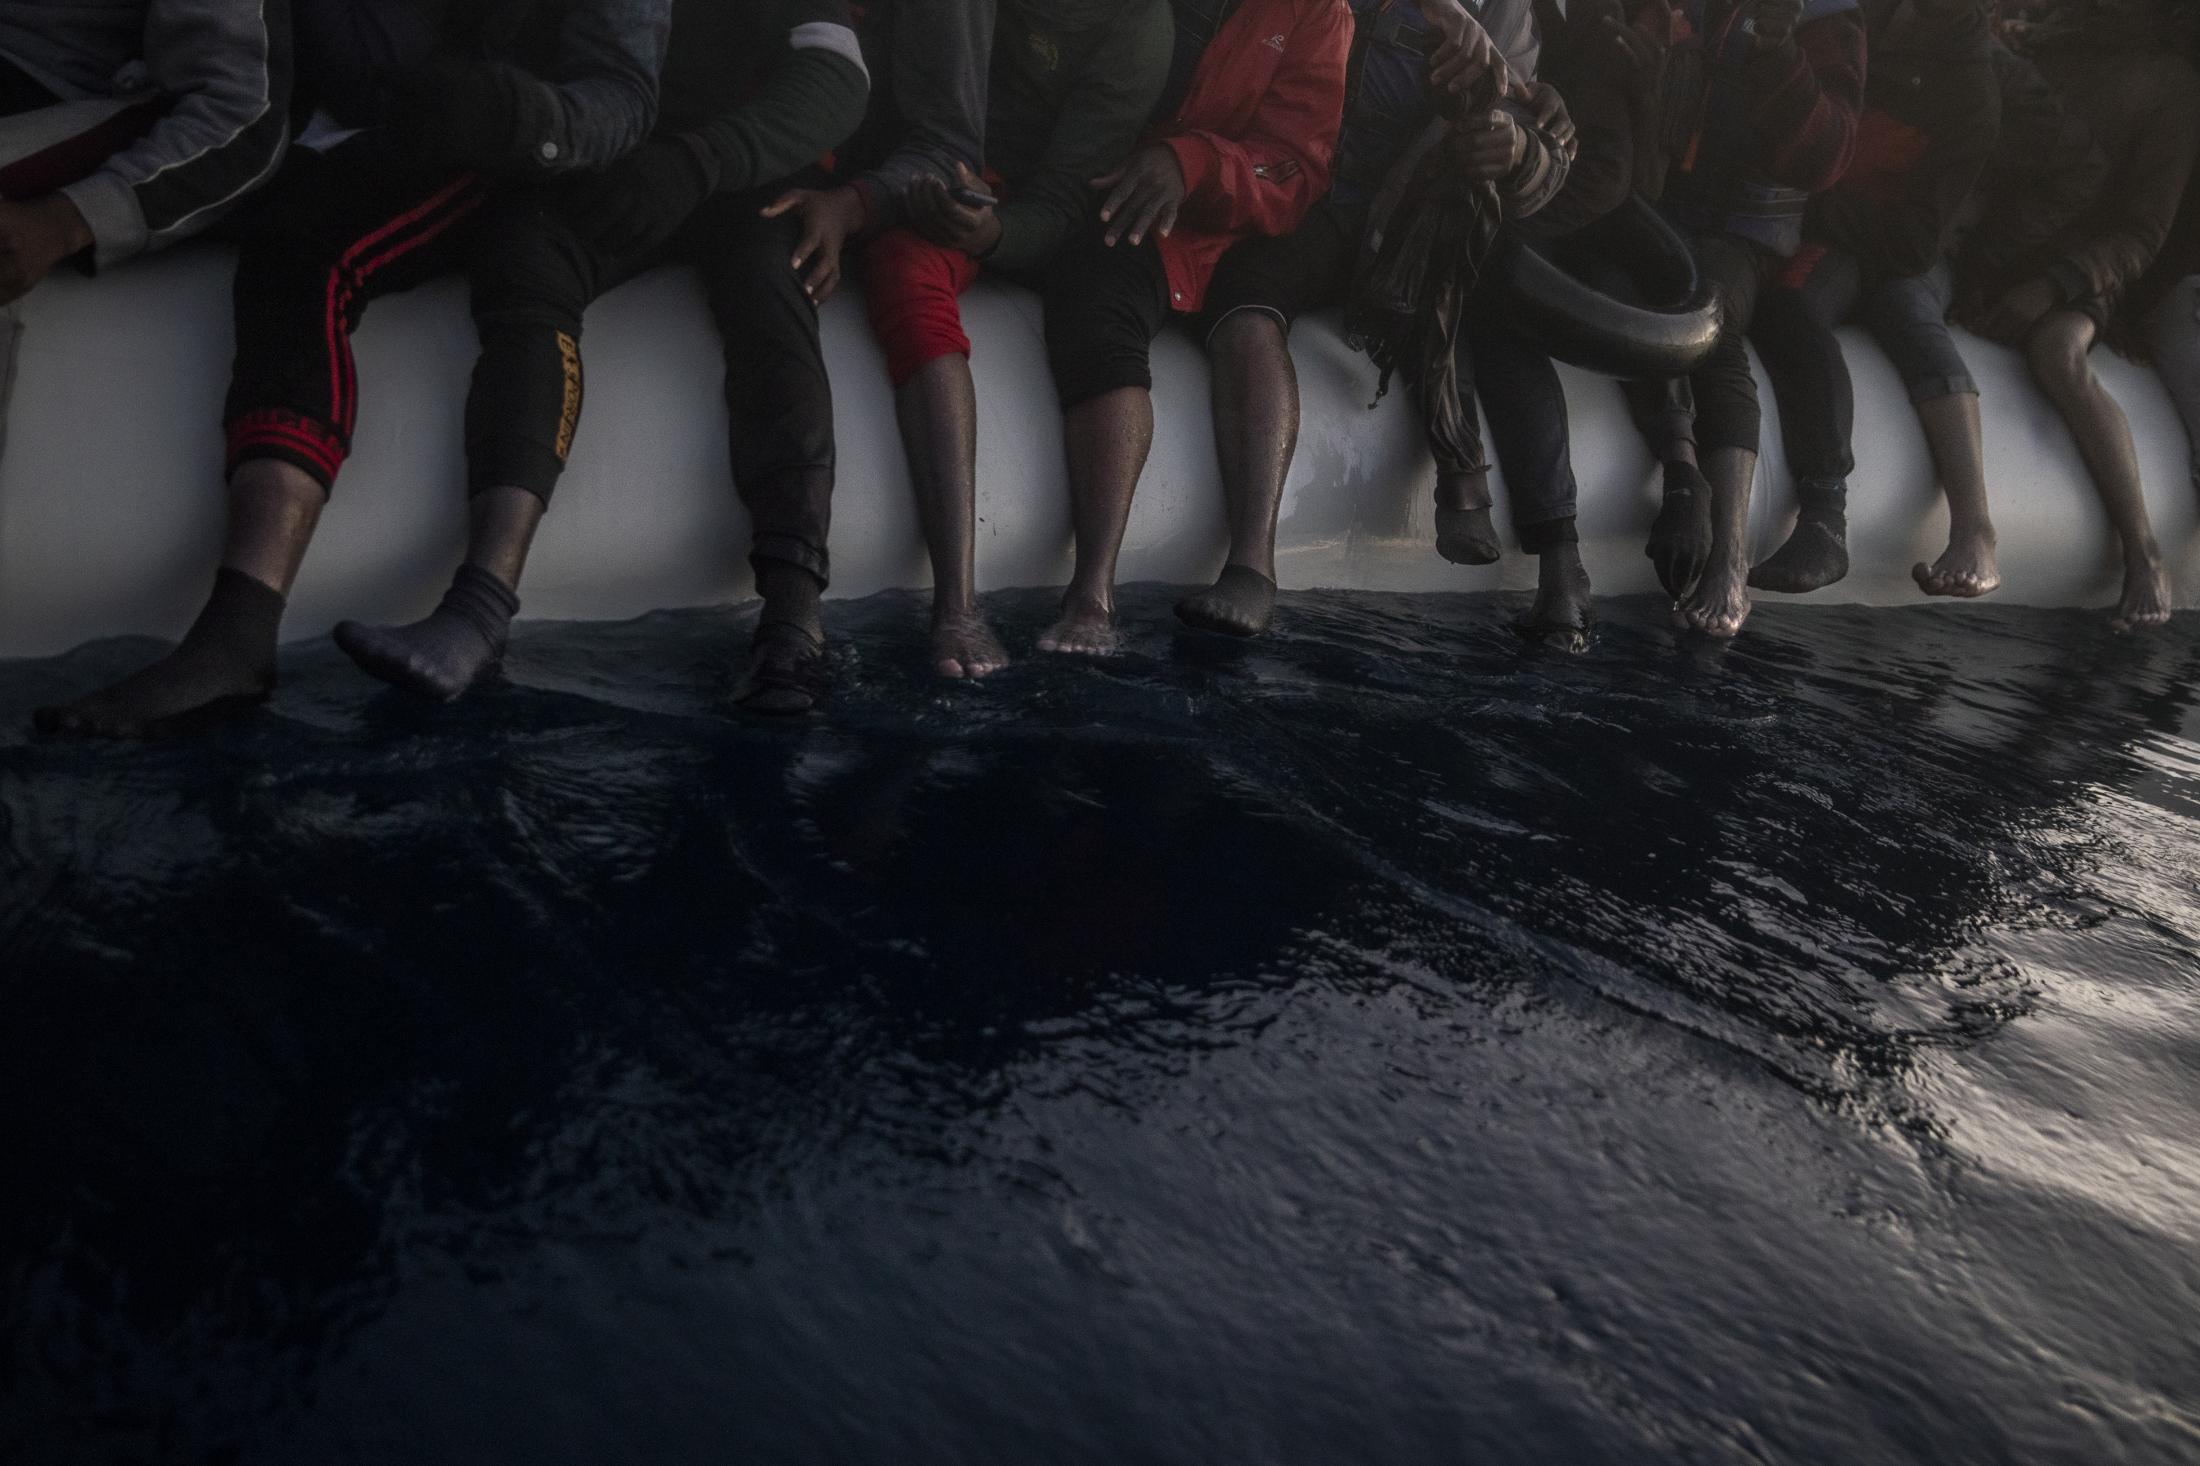 Migrants and refugees are seen barefoot in a rubber boat. Migrants and refugees from different...